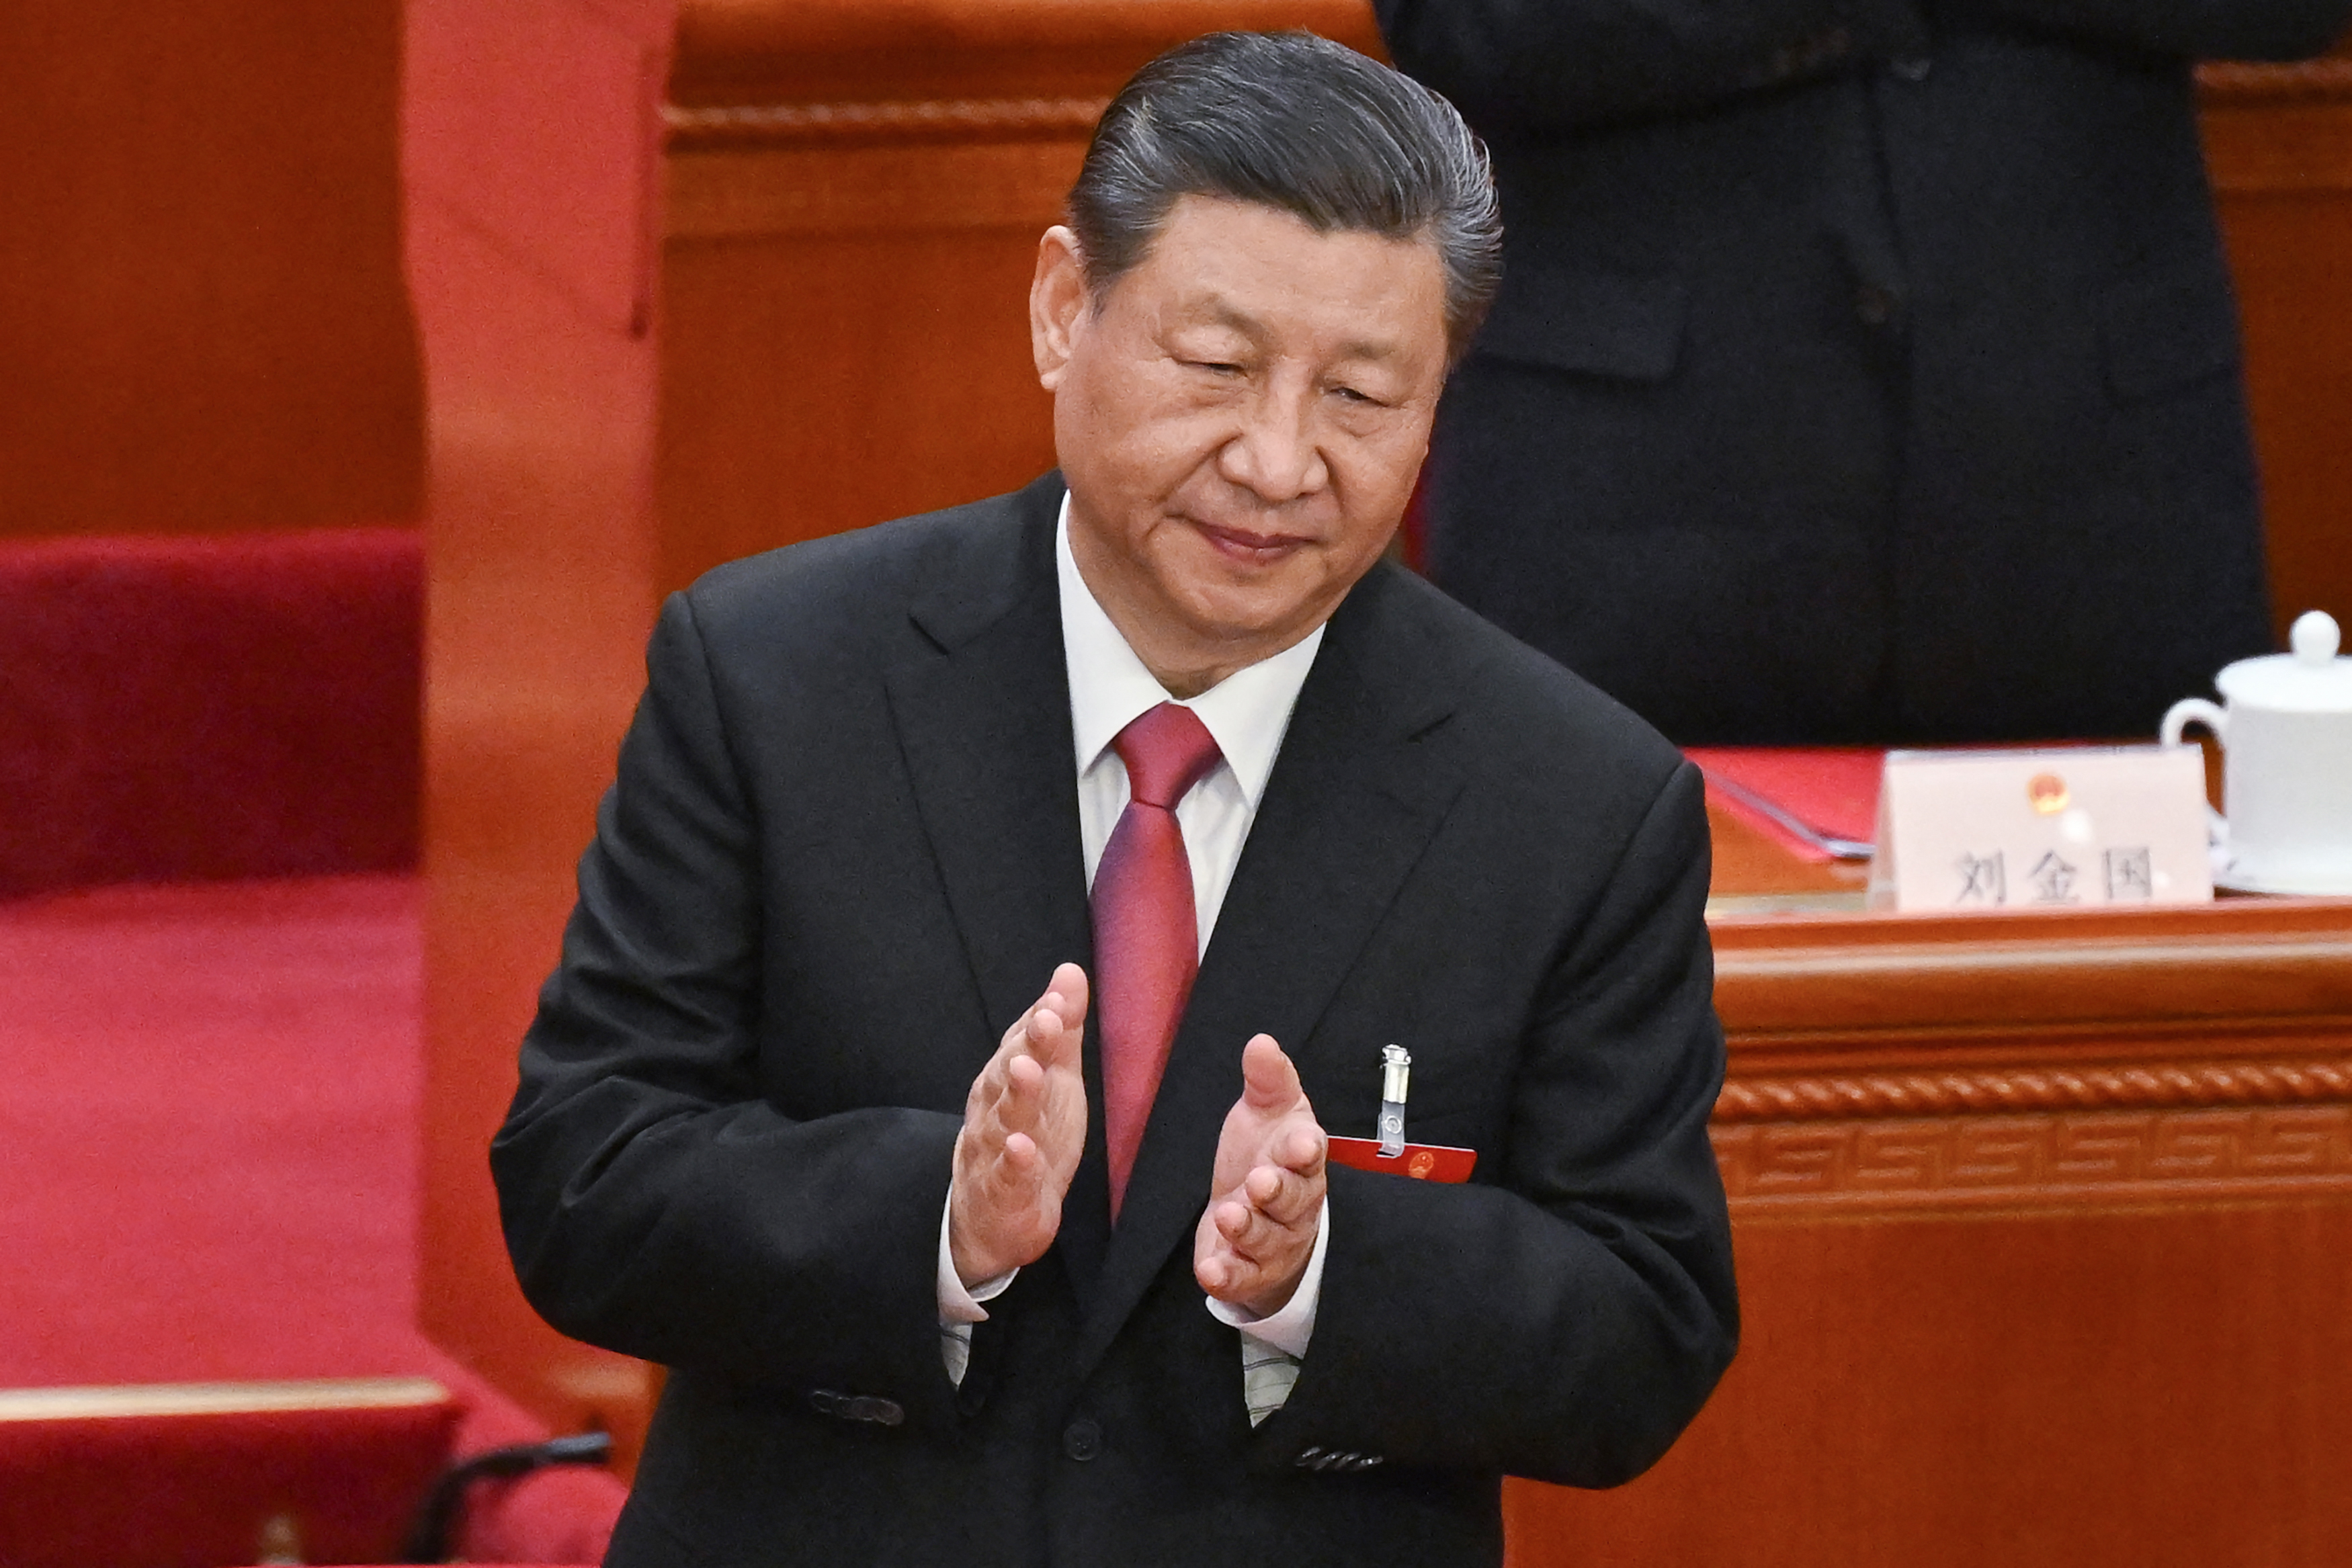 China's President Xi Jinping on March 11